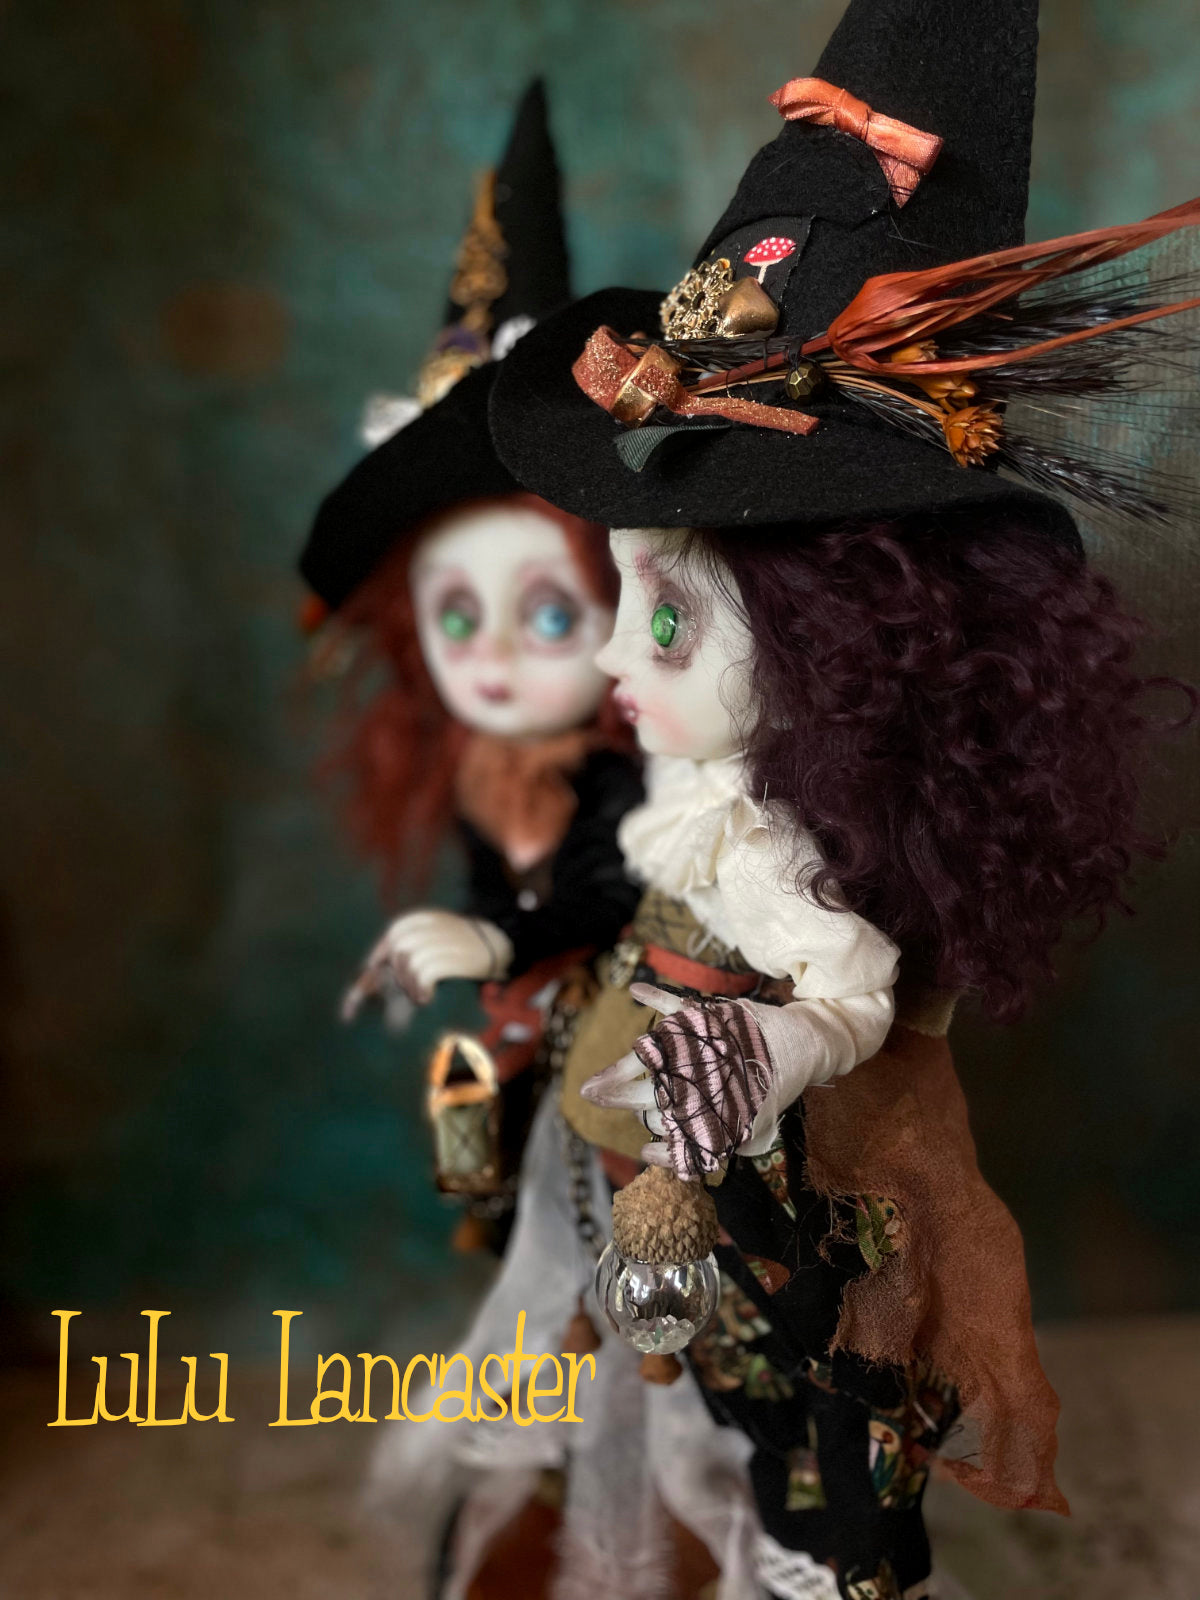 Conjoined Steampunk Witches Jade and Jinx Original LuLu Lancaster Art Doll